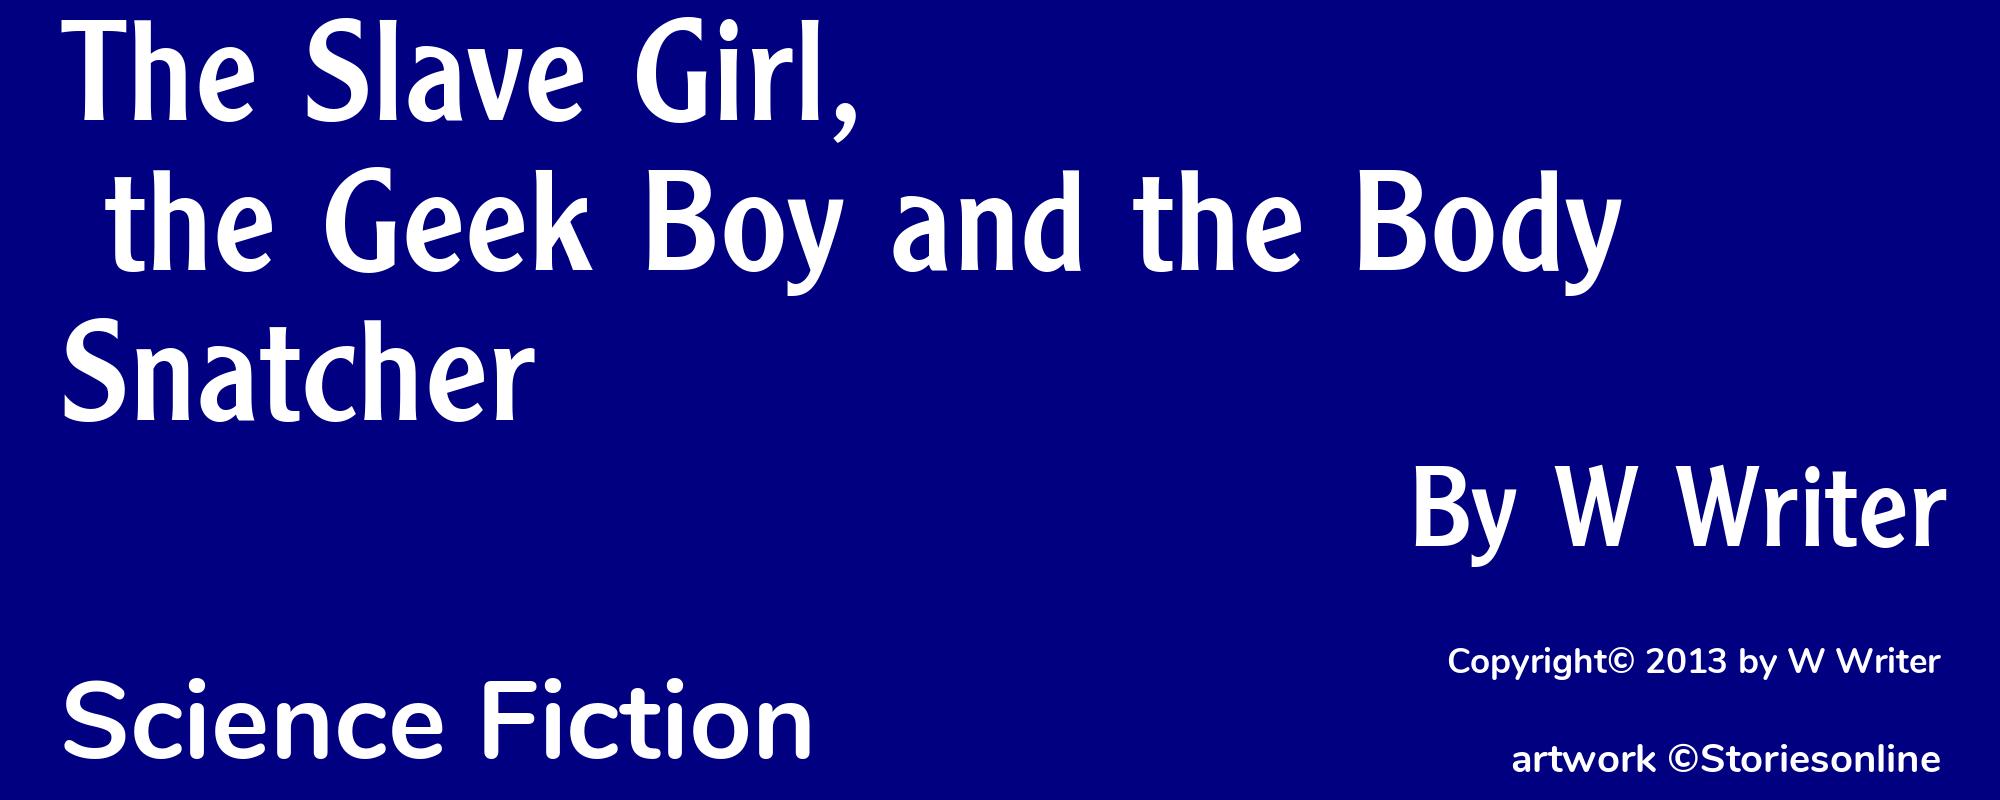 The Slave Girl, the Geek Boy and the Body Snatcher - Cover